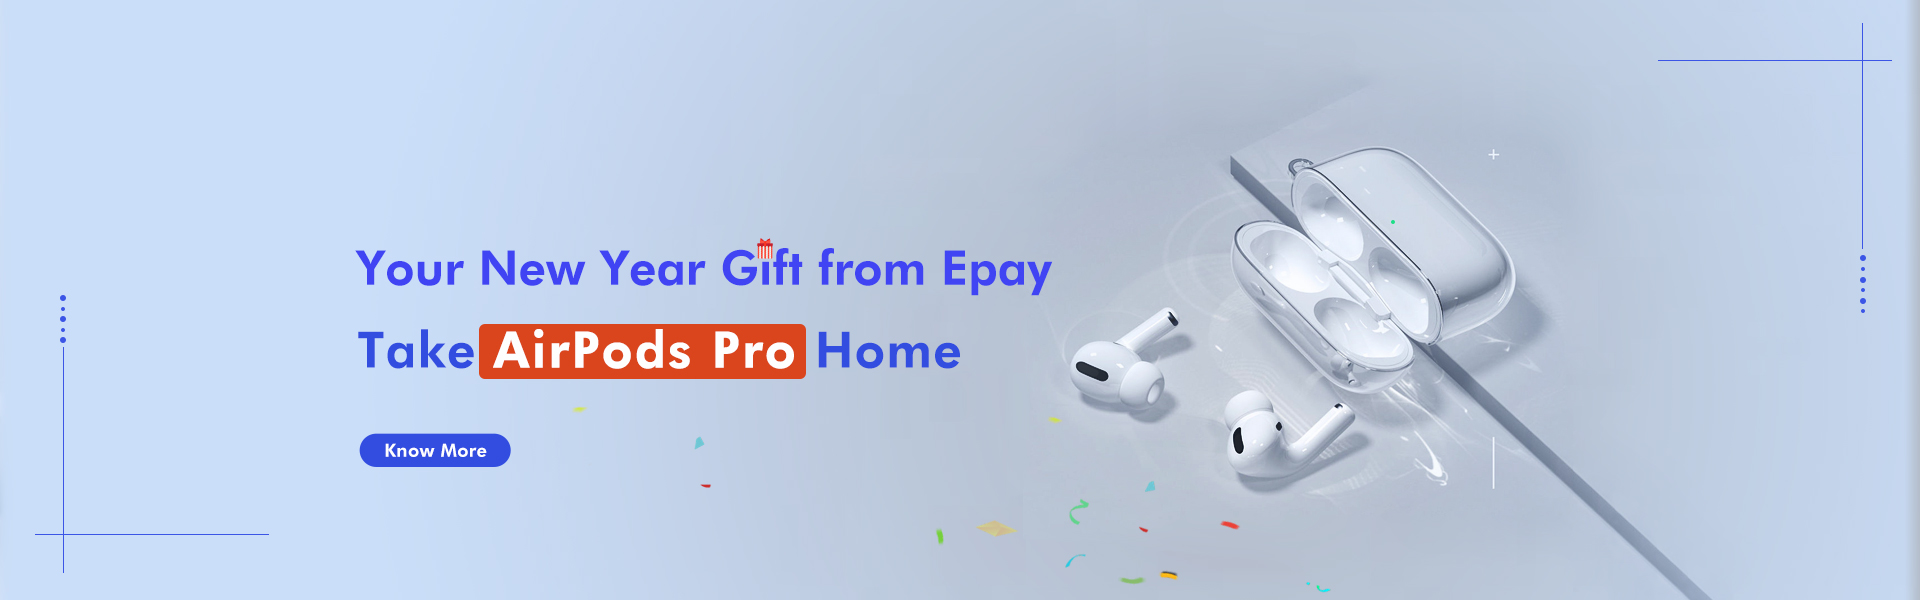 send money oversea, take the airpods home